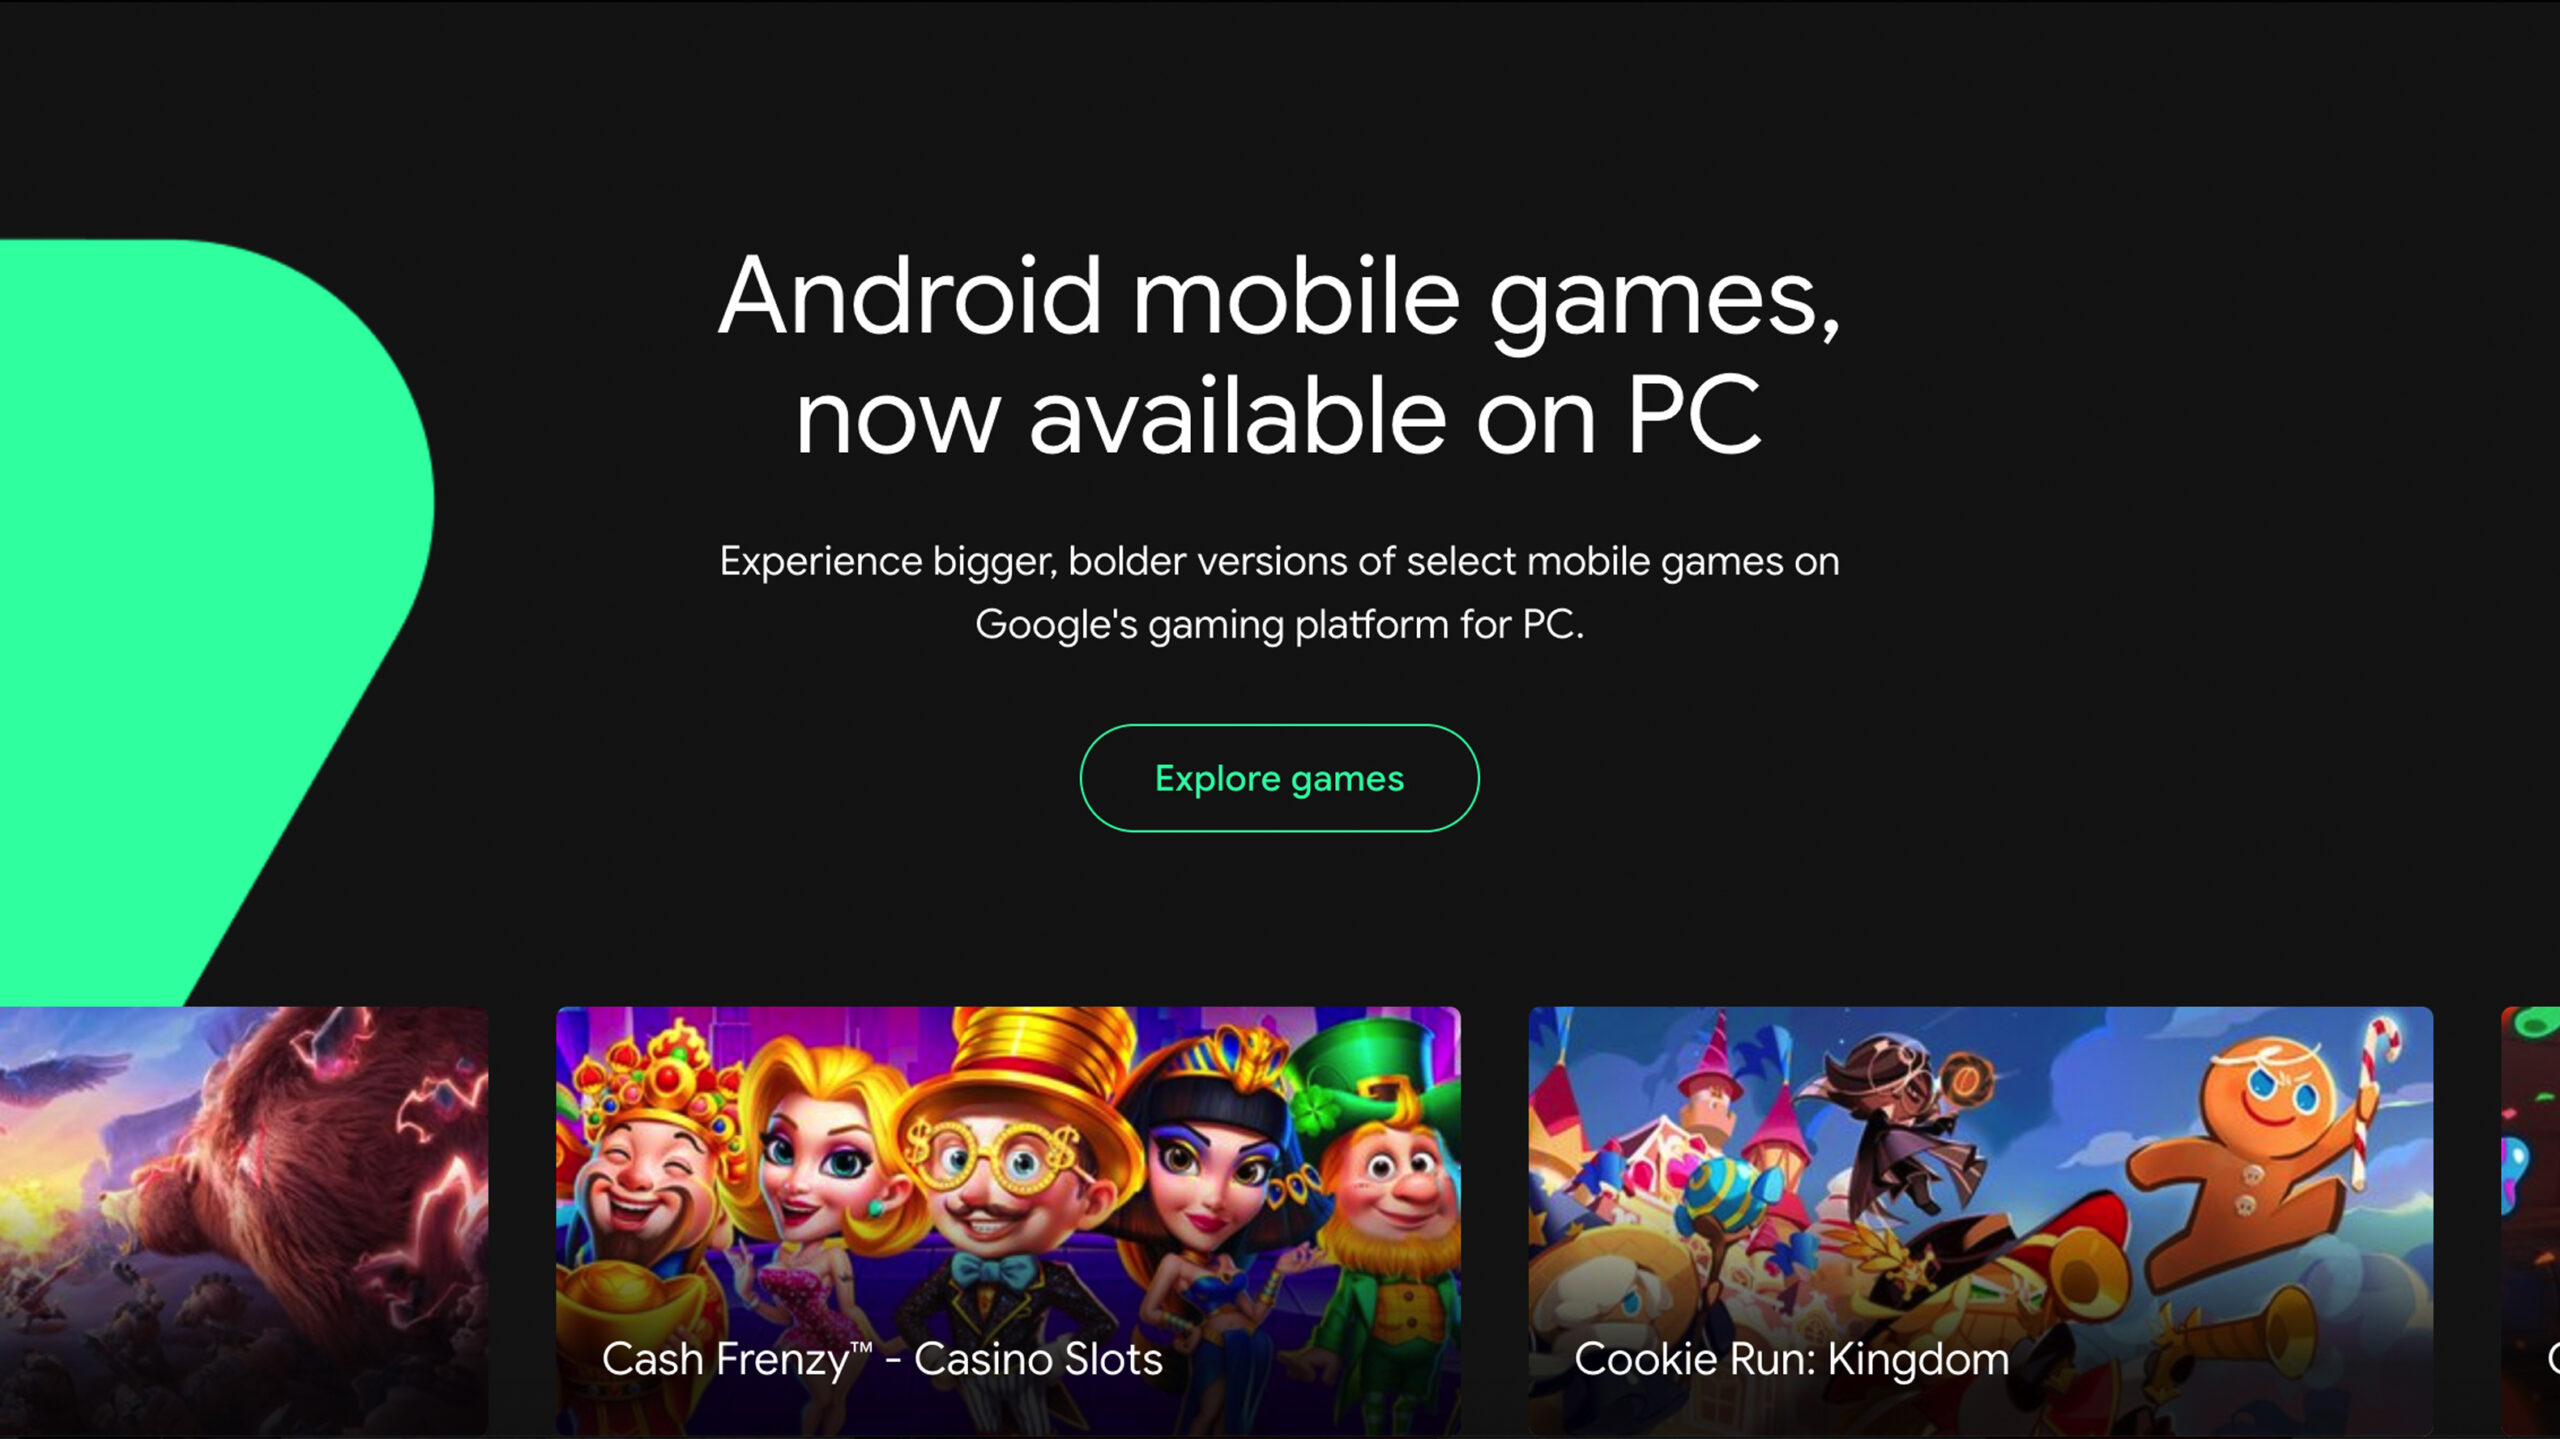 Google Play Games beta on PC: Now available in 120 regions around the world